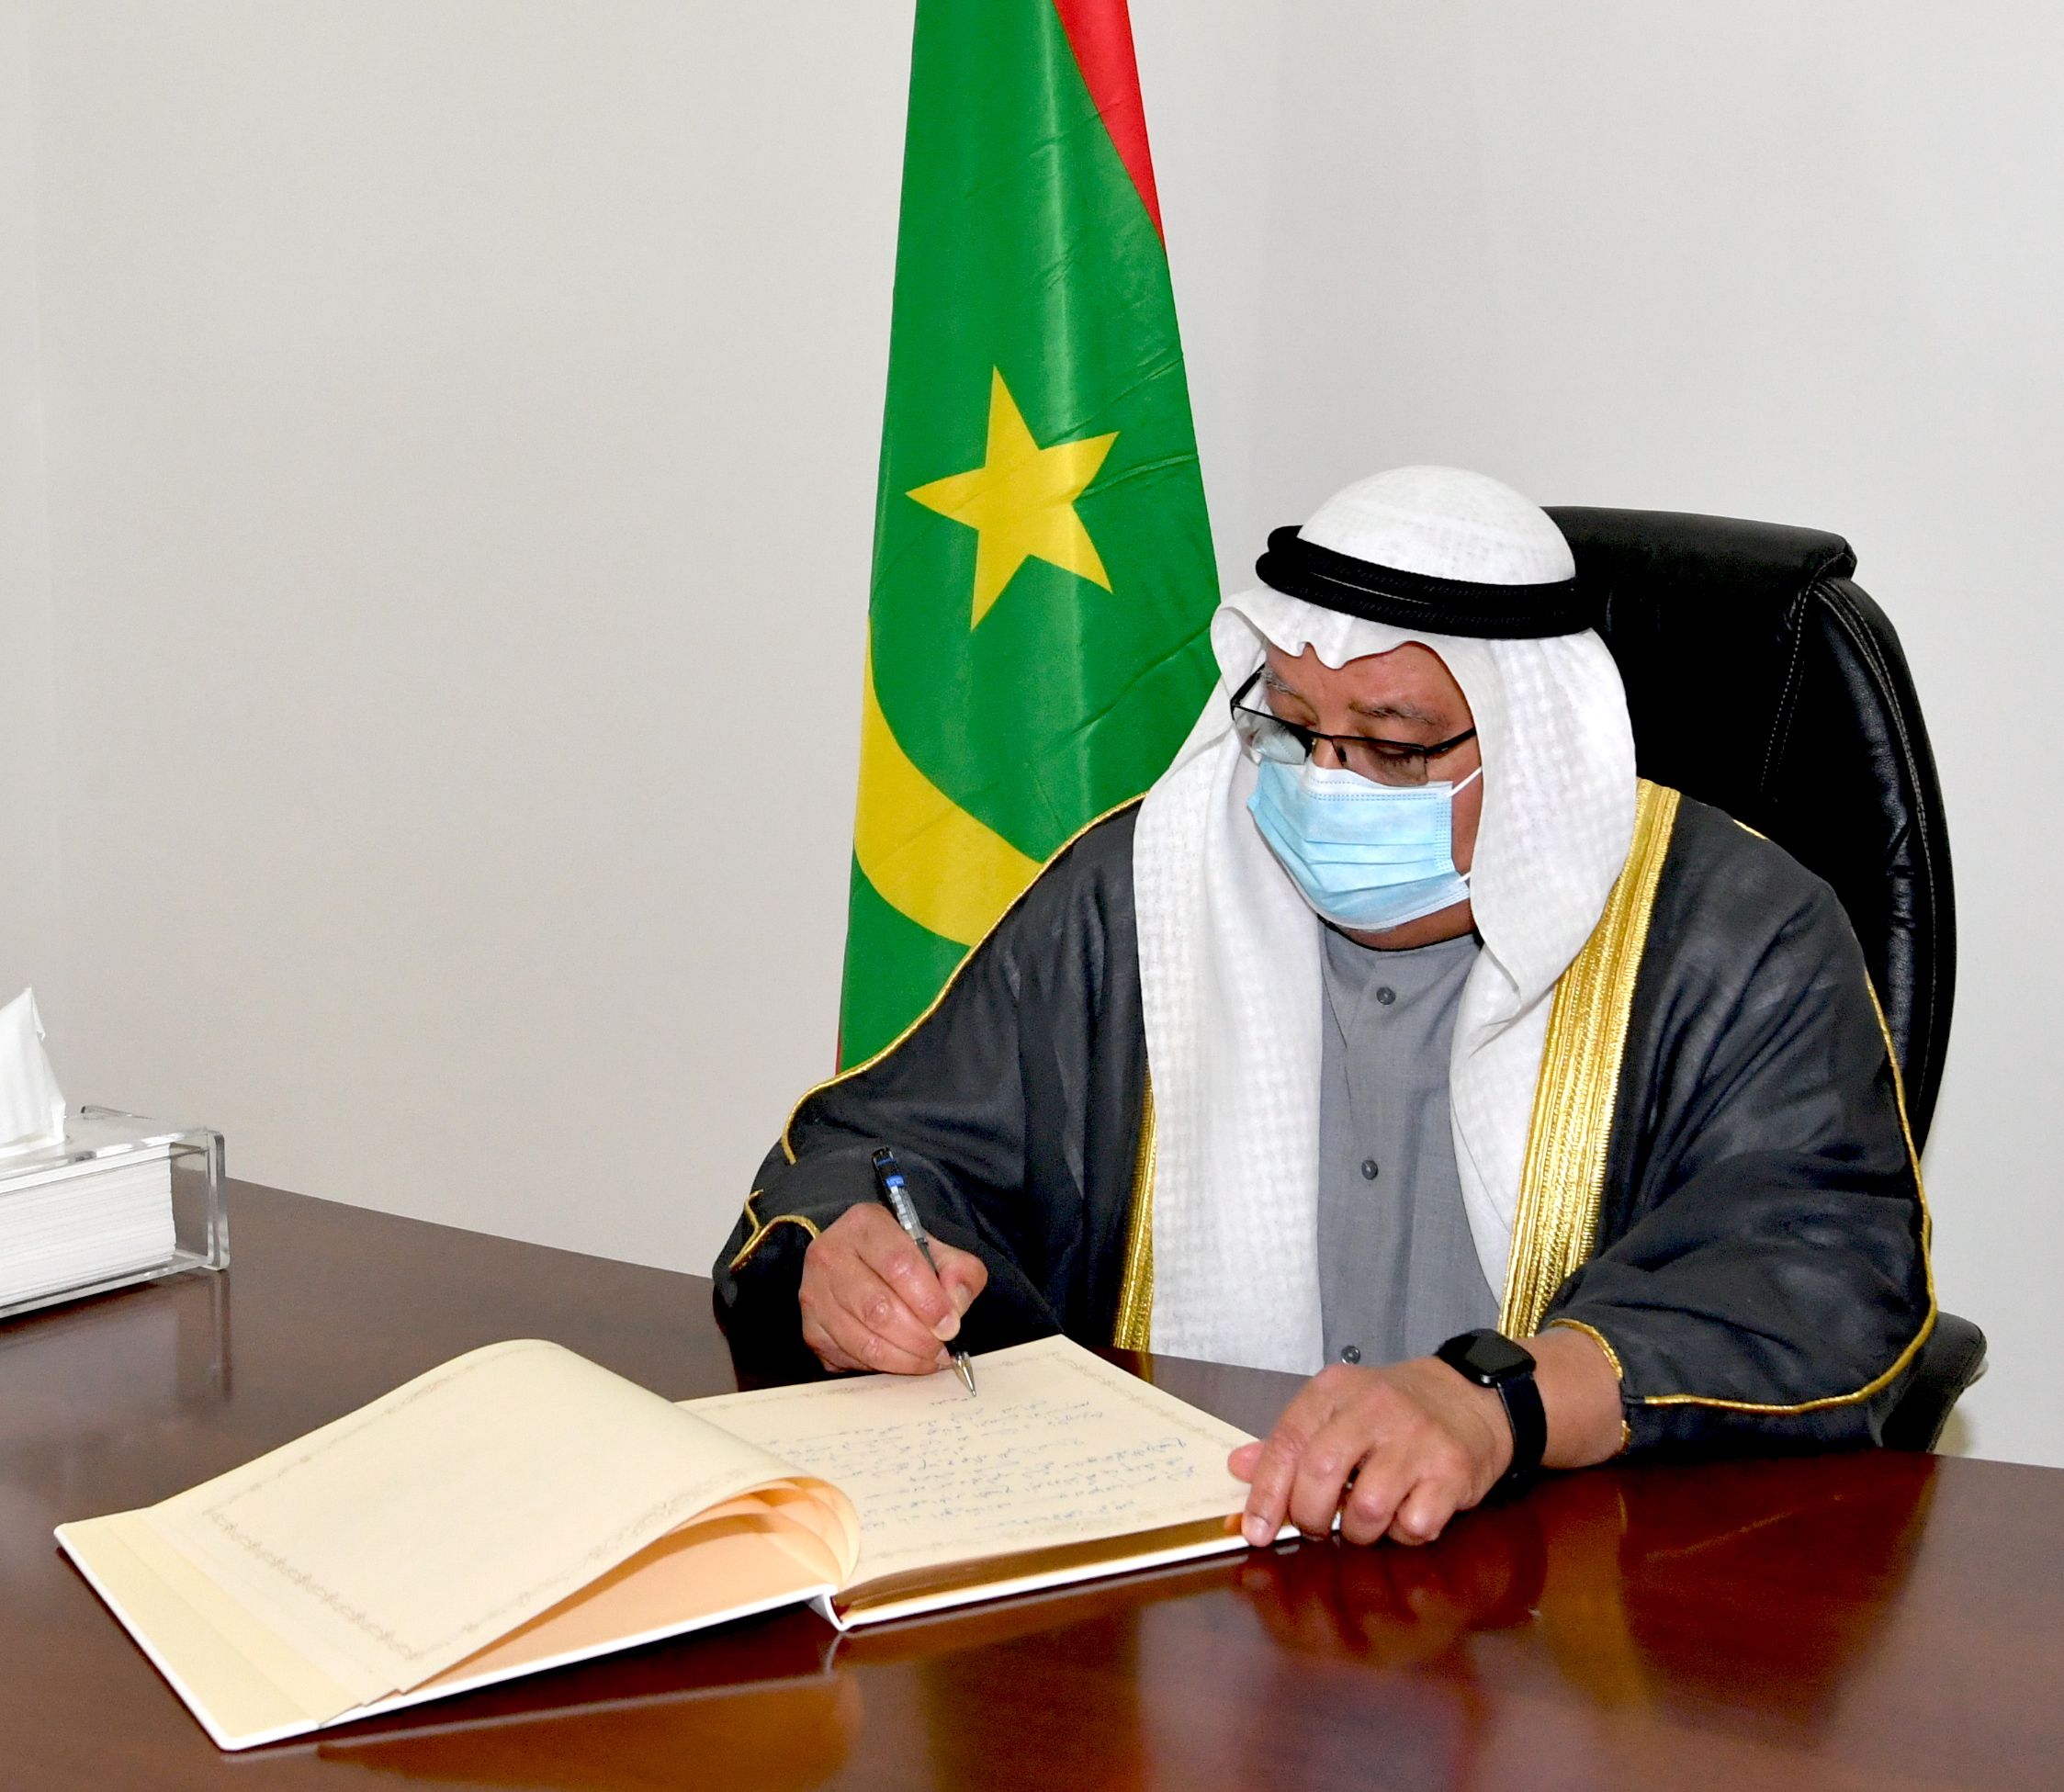 Minister of Amiri Diwan Affairs condolences over the demise of the former President